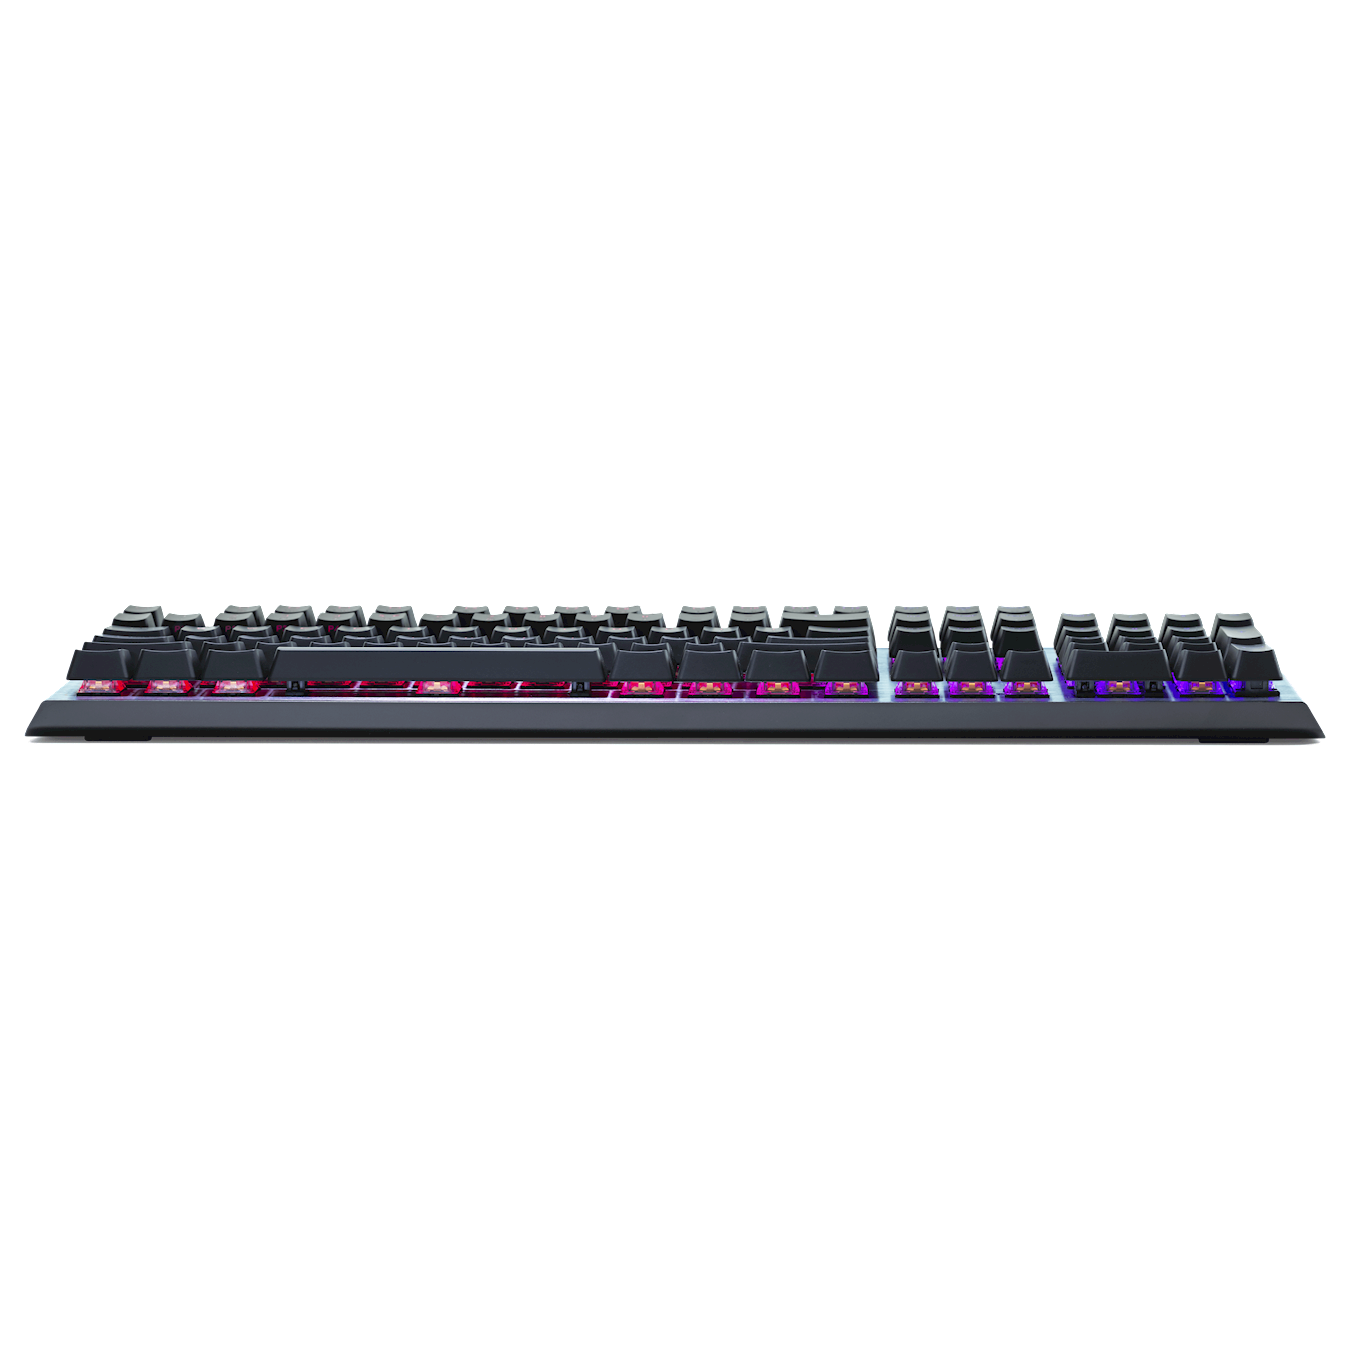 CK550 RGB Mechanical Gaming Keyboard - for those Pro users interested in custom keycaps, the CK550 features a standard sizes layout and bottom row